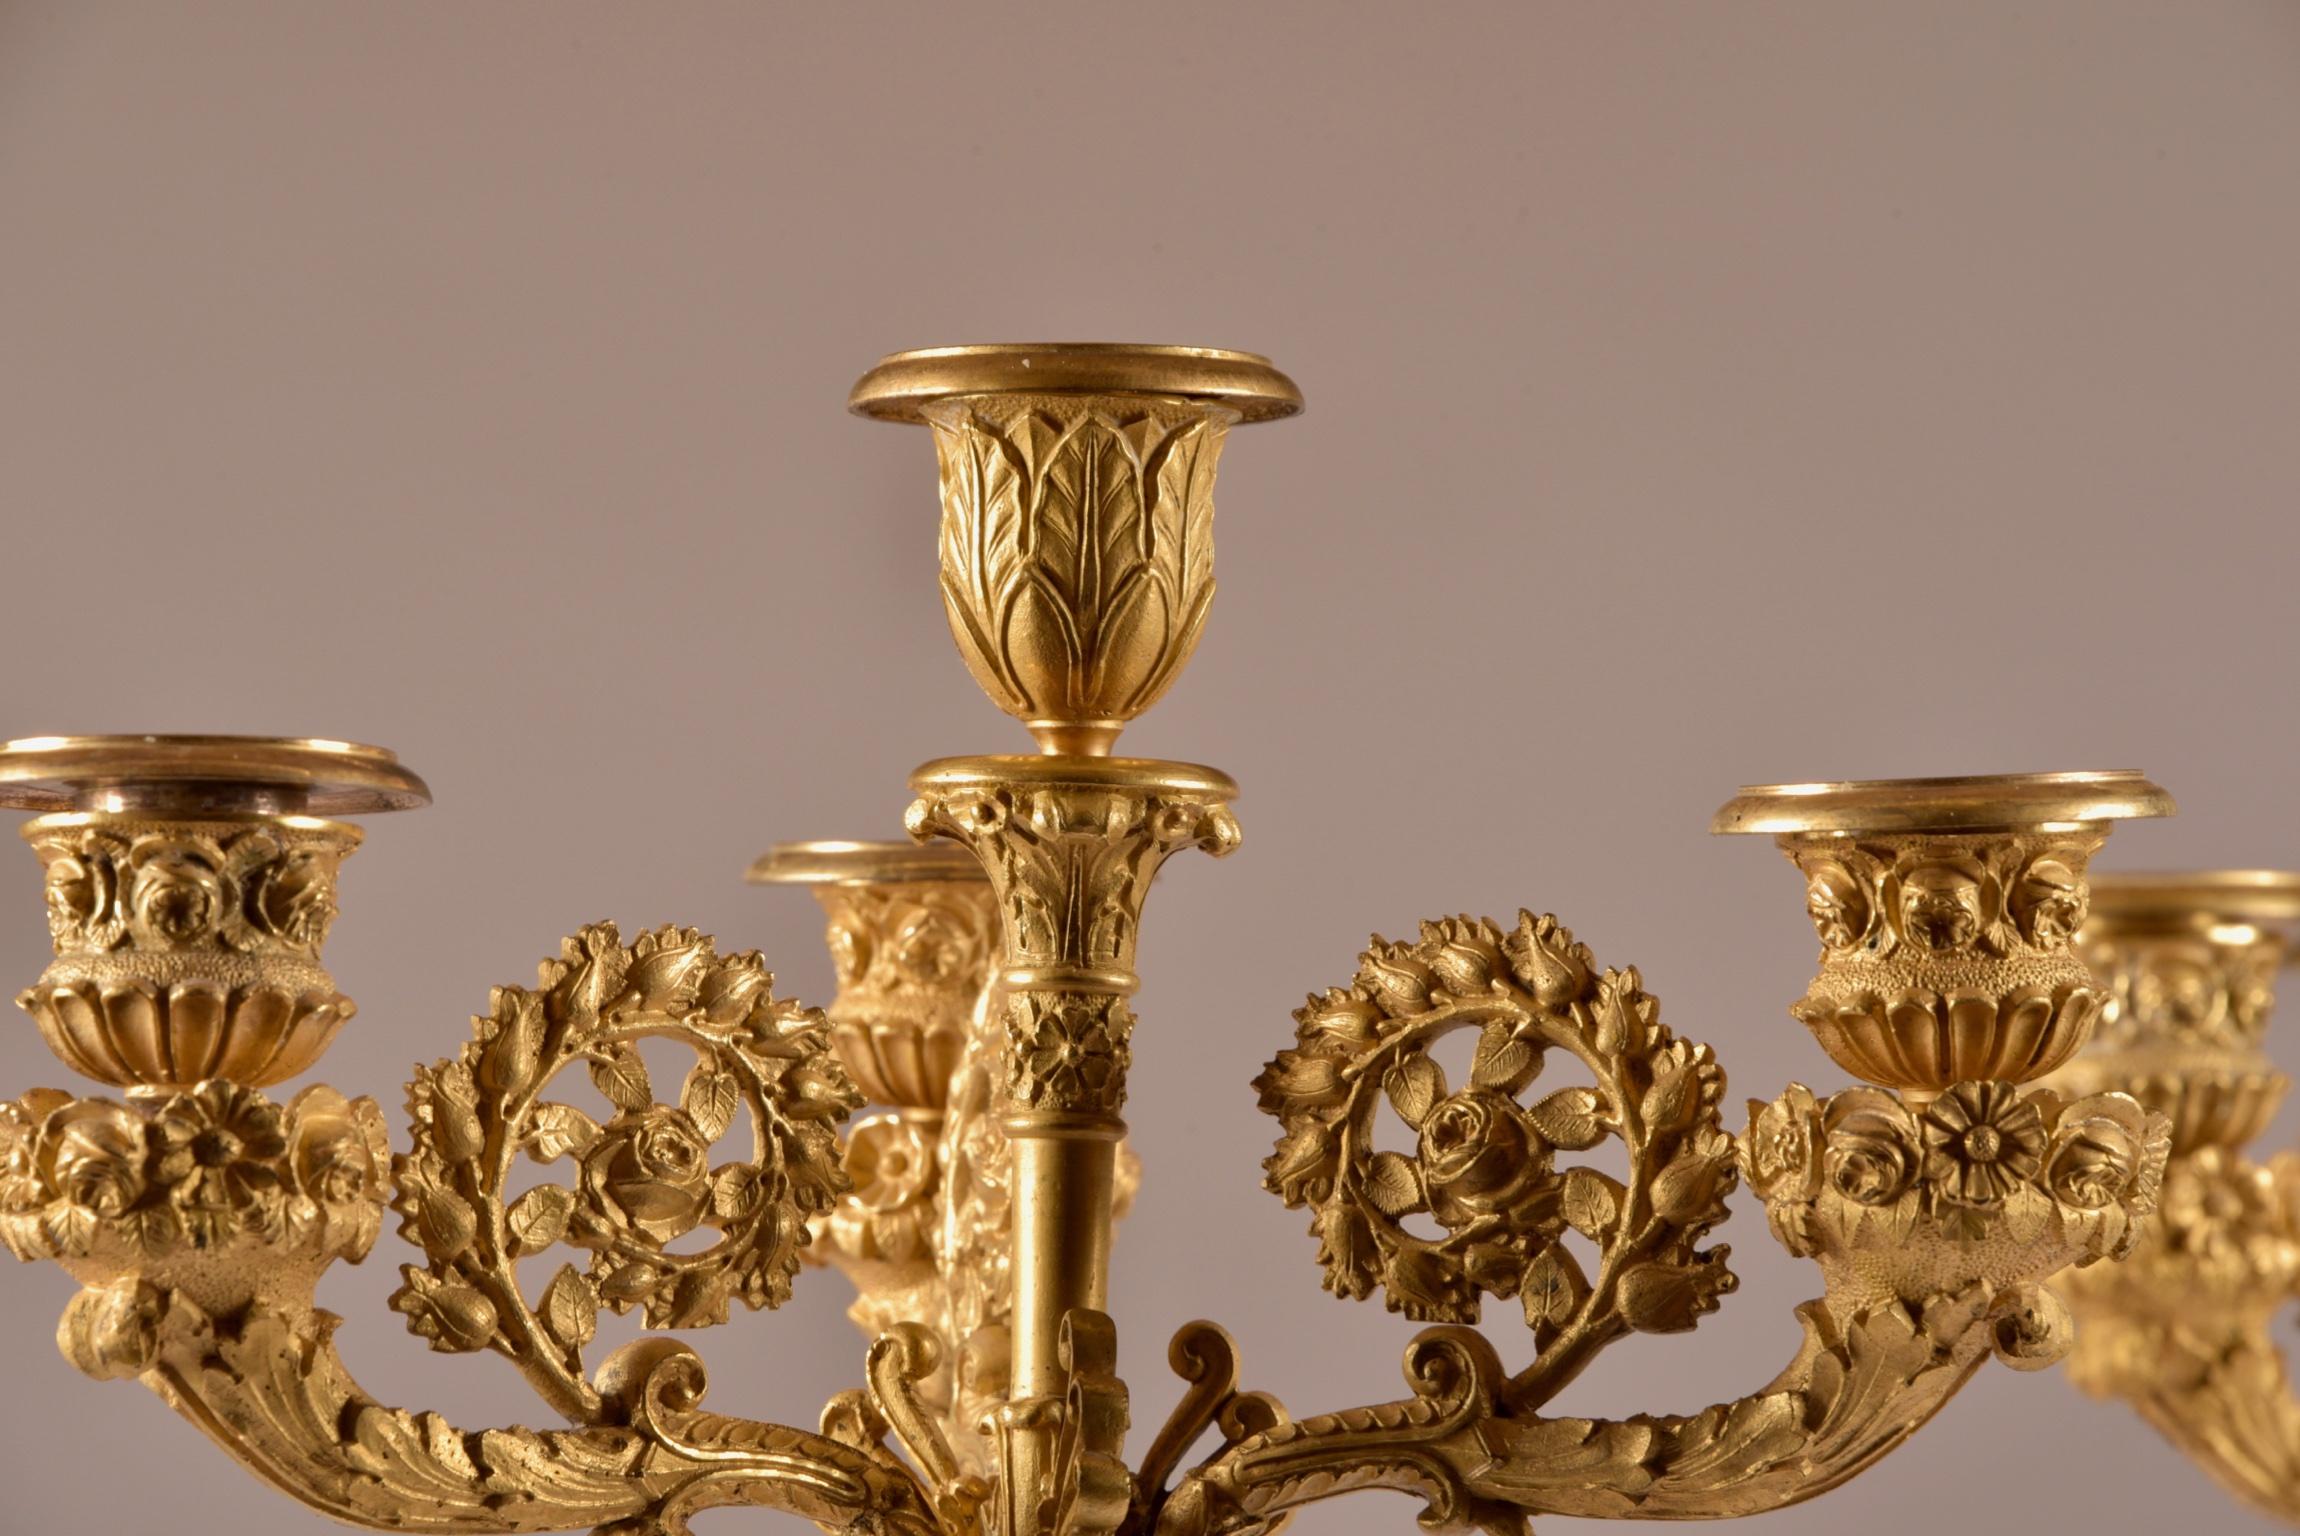 Pair of French Empire Candelabras with Putti, Superb Ormolu Candleholders, 1810  For Sale 8